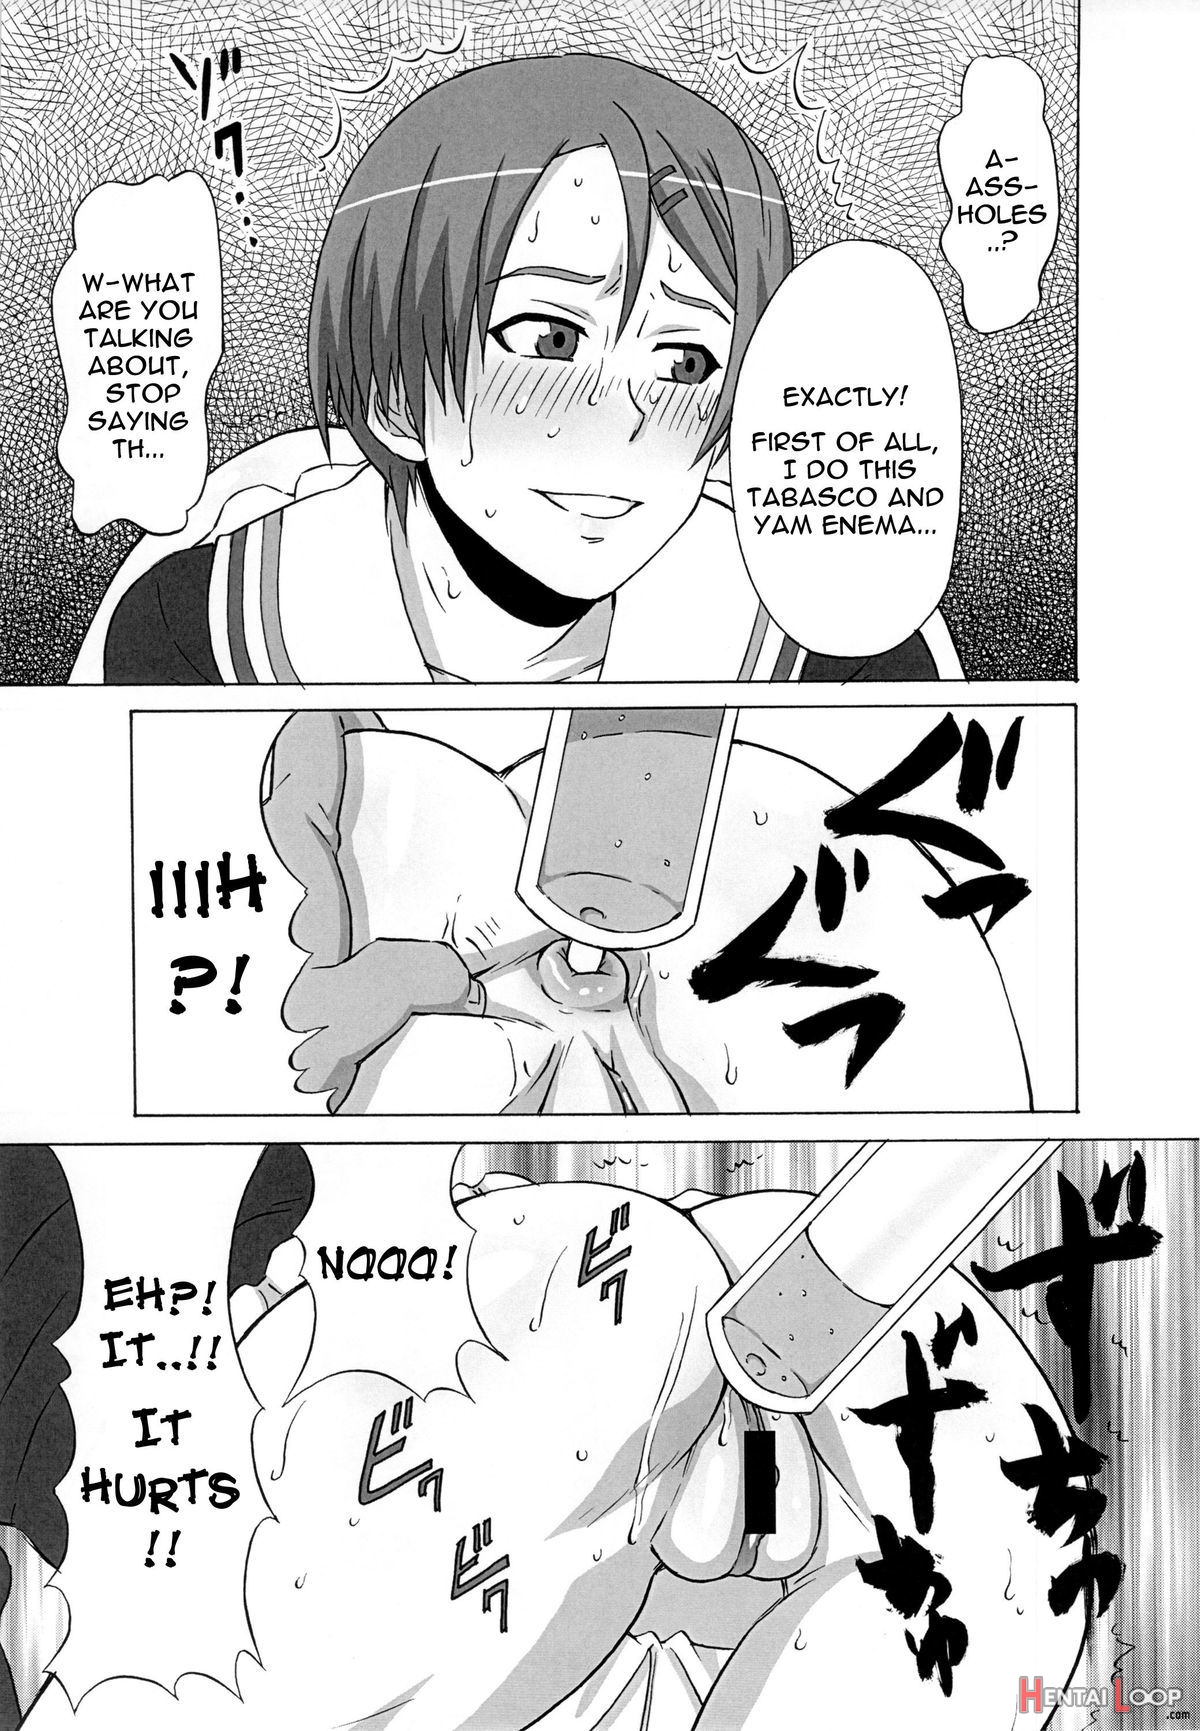 I Wanna Control Riko And Make Her Do Lots Of Humiliating Things. page 8